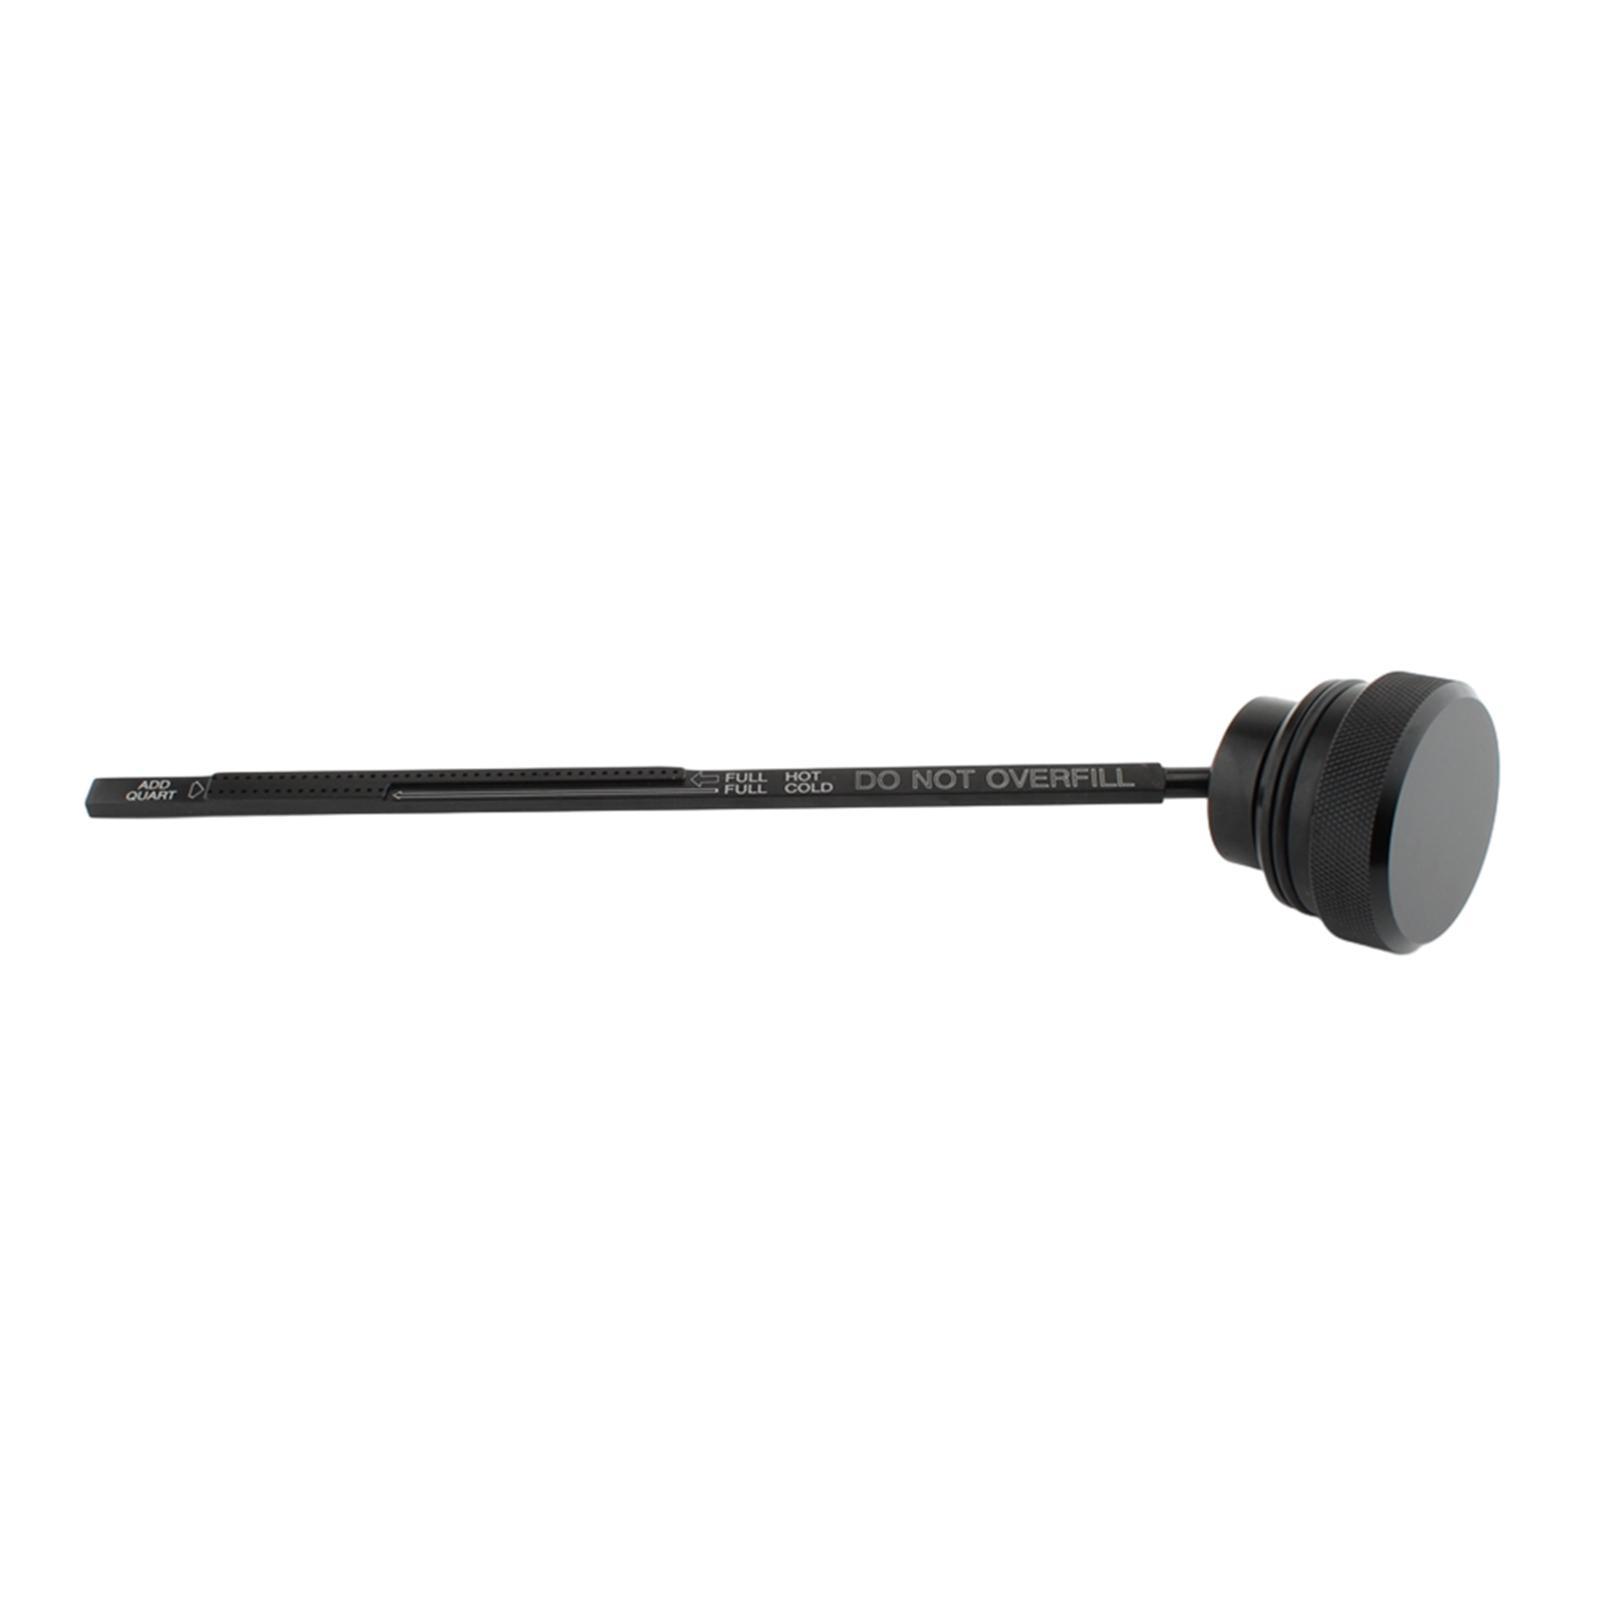 Oil Dipstick Accessories Oil Tank Dipstick for Low Fxdl 1997-1998